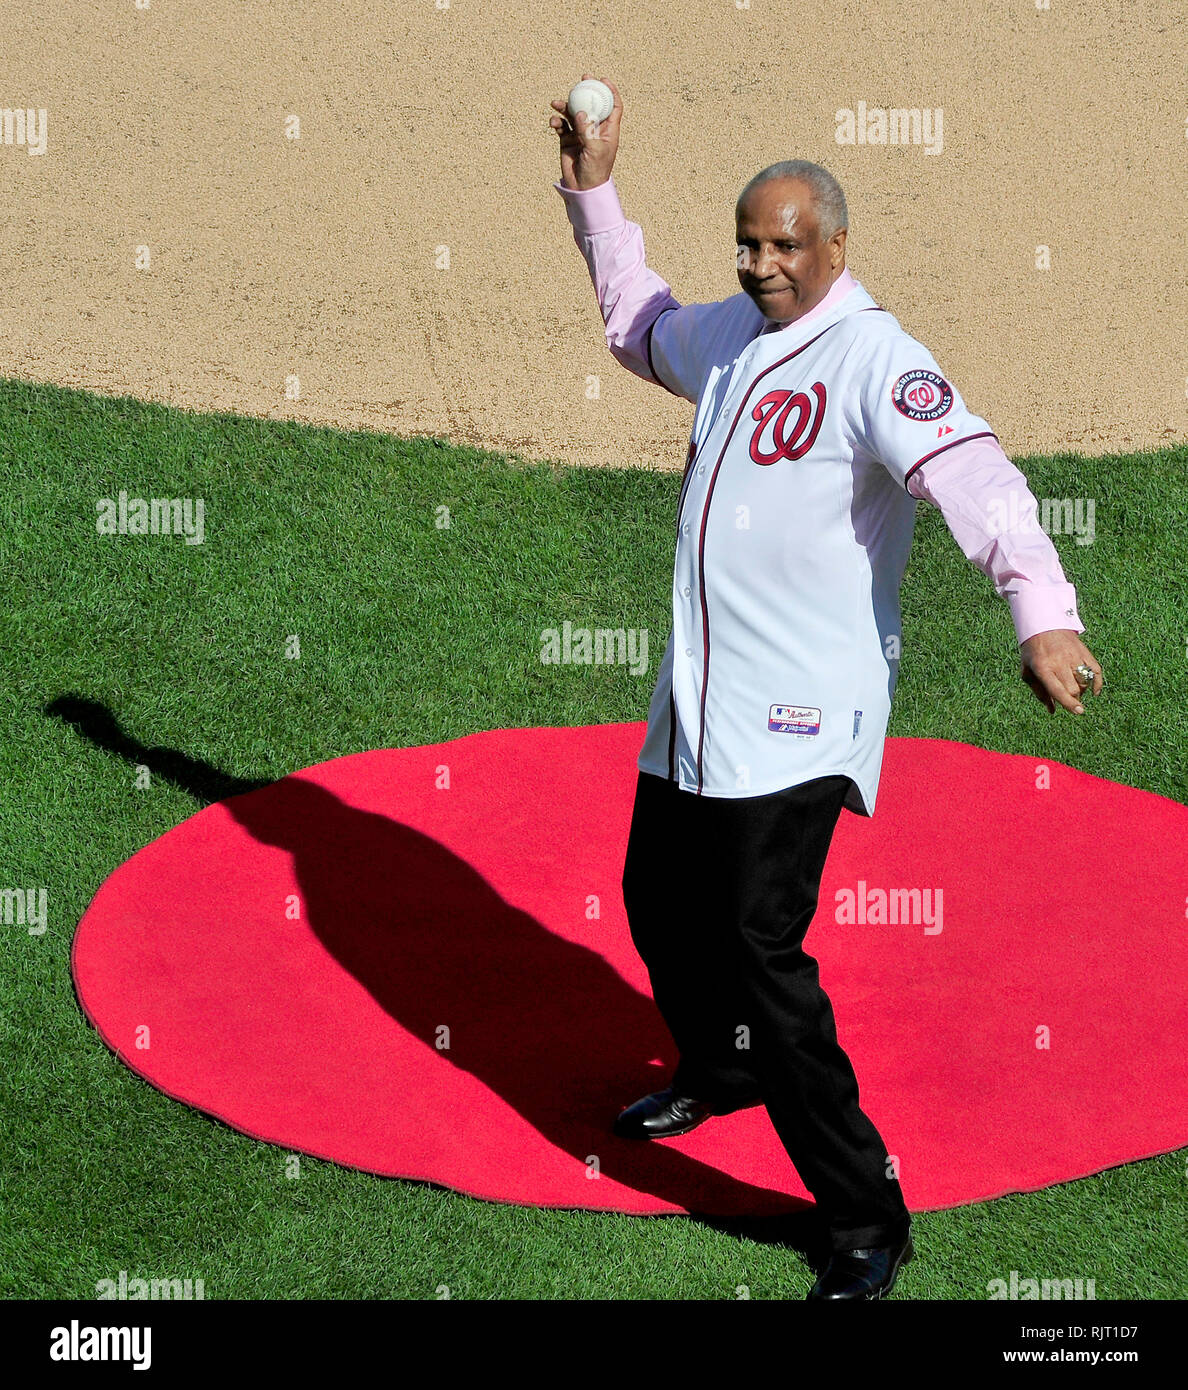 https://c8.alamy.com/comp/RJT1D7/file-photo-frank-robinson-has-passed-away-at-83-hall-of-fame-outfielder-and-former-washington-nationals-manager-frank-robinson-throws-out-the-first-ball-at-nationals-park-prior-to-game-3-of-the-nlds-against-the-st-louis-cardinals-in-washington-dc-on-wednesday-october-10-2012-the-cardinals-won-the-game-8-0credit-ron-sachscnp-mediapunch-RJT1D7.jpg